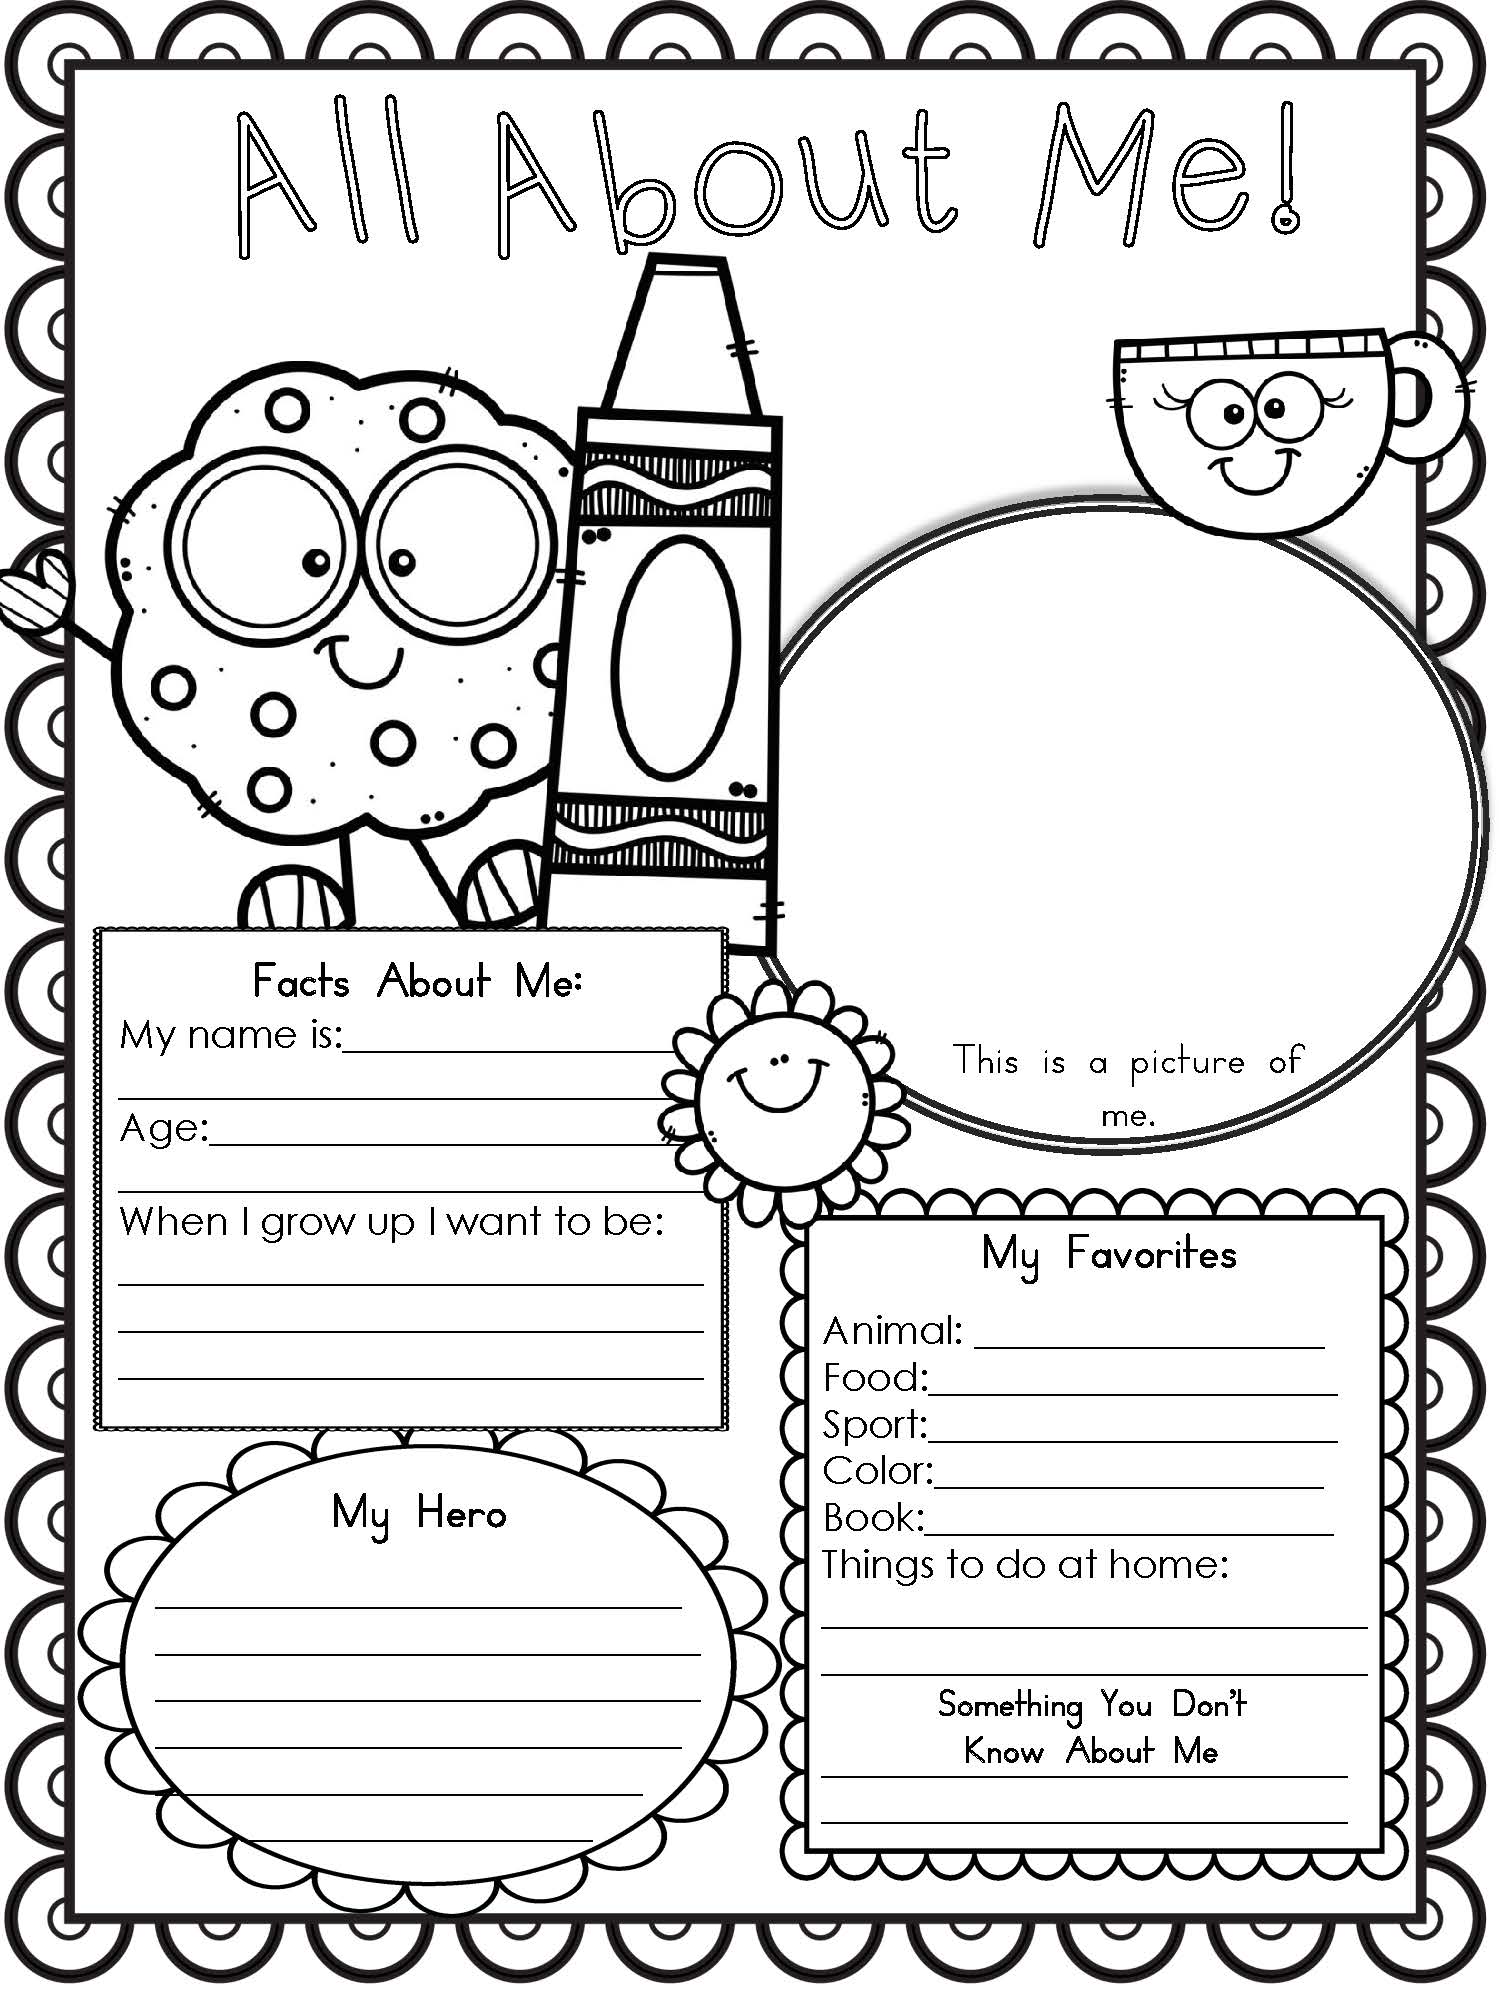 Free Printable All About Me Worksheet - Modern Homeschool Family With Regard To All About Me Printable Worksheet